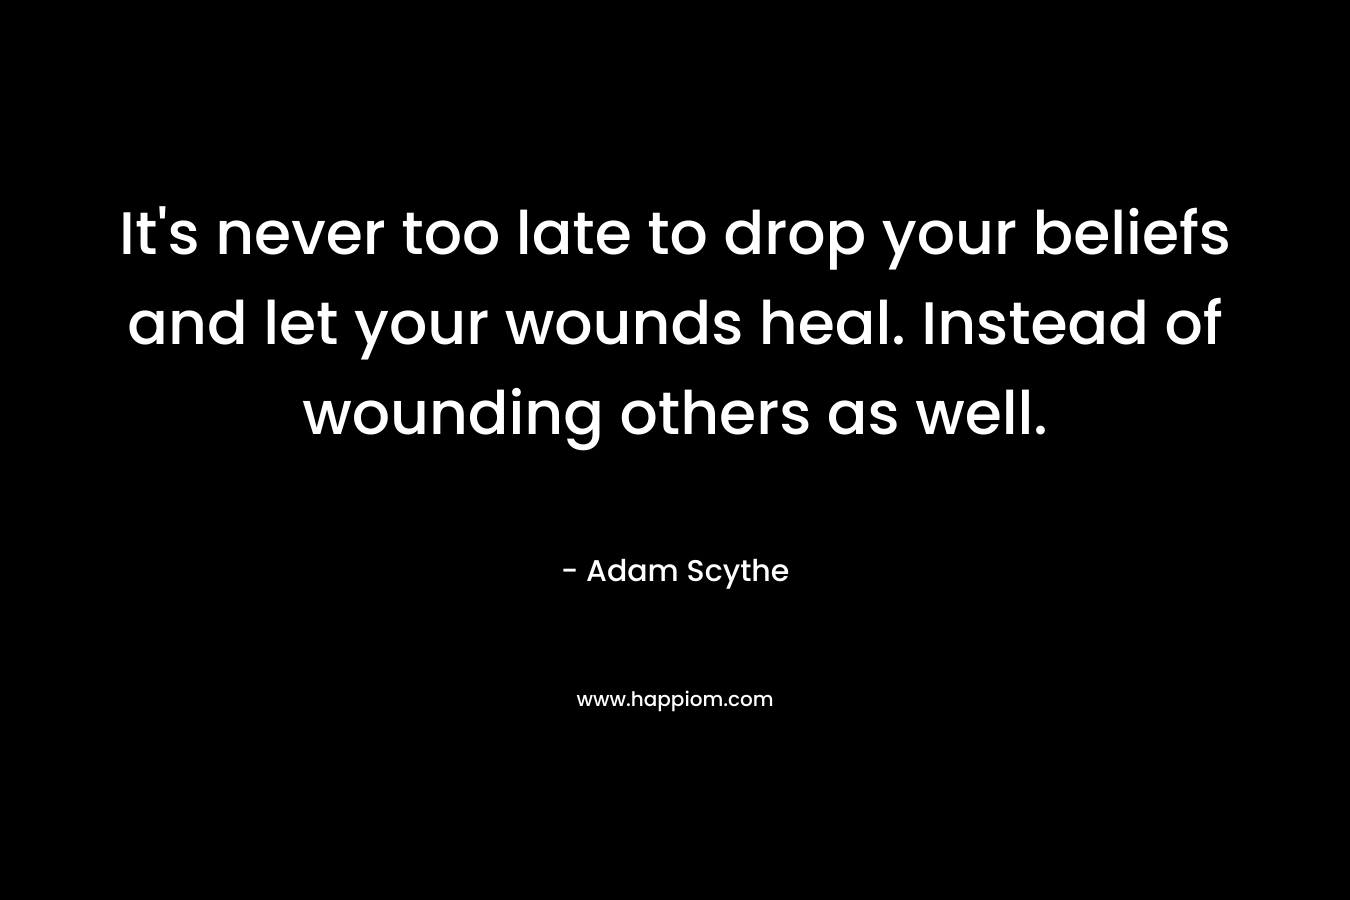 It’s never too late to drop your beliefs and let your wounds heal. Instead of wounding others as well. – Adam Scythe